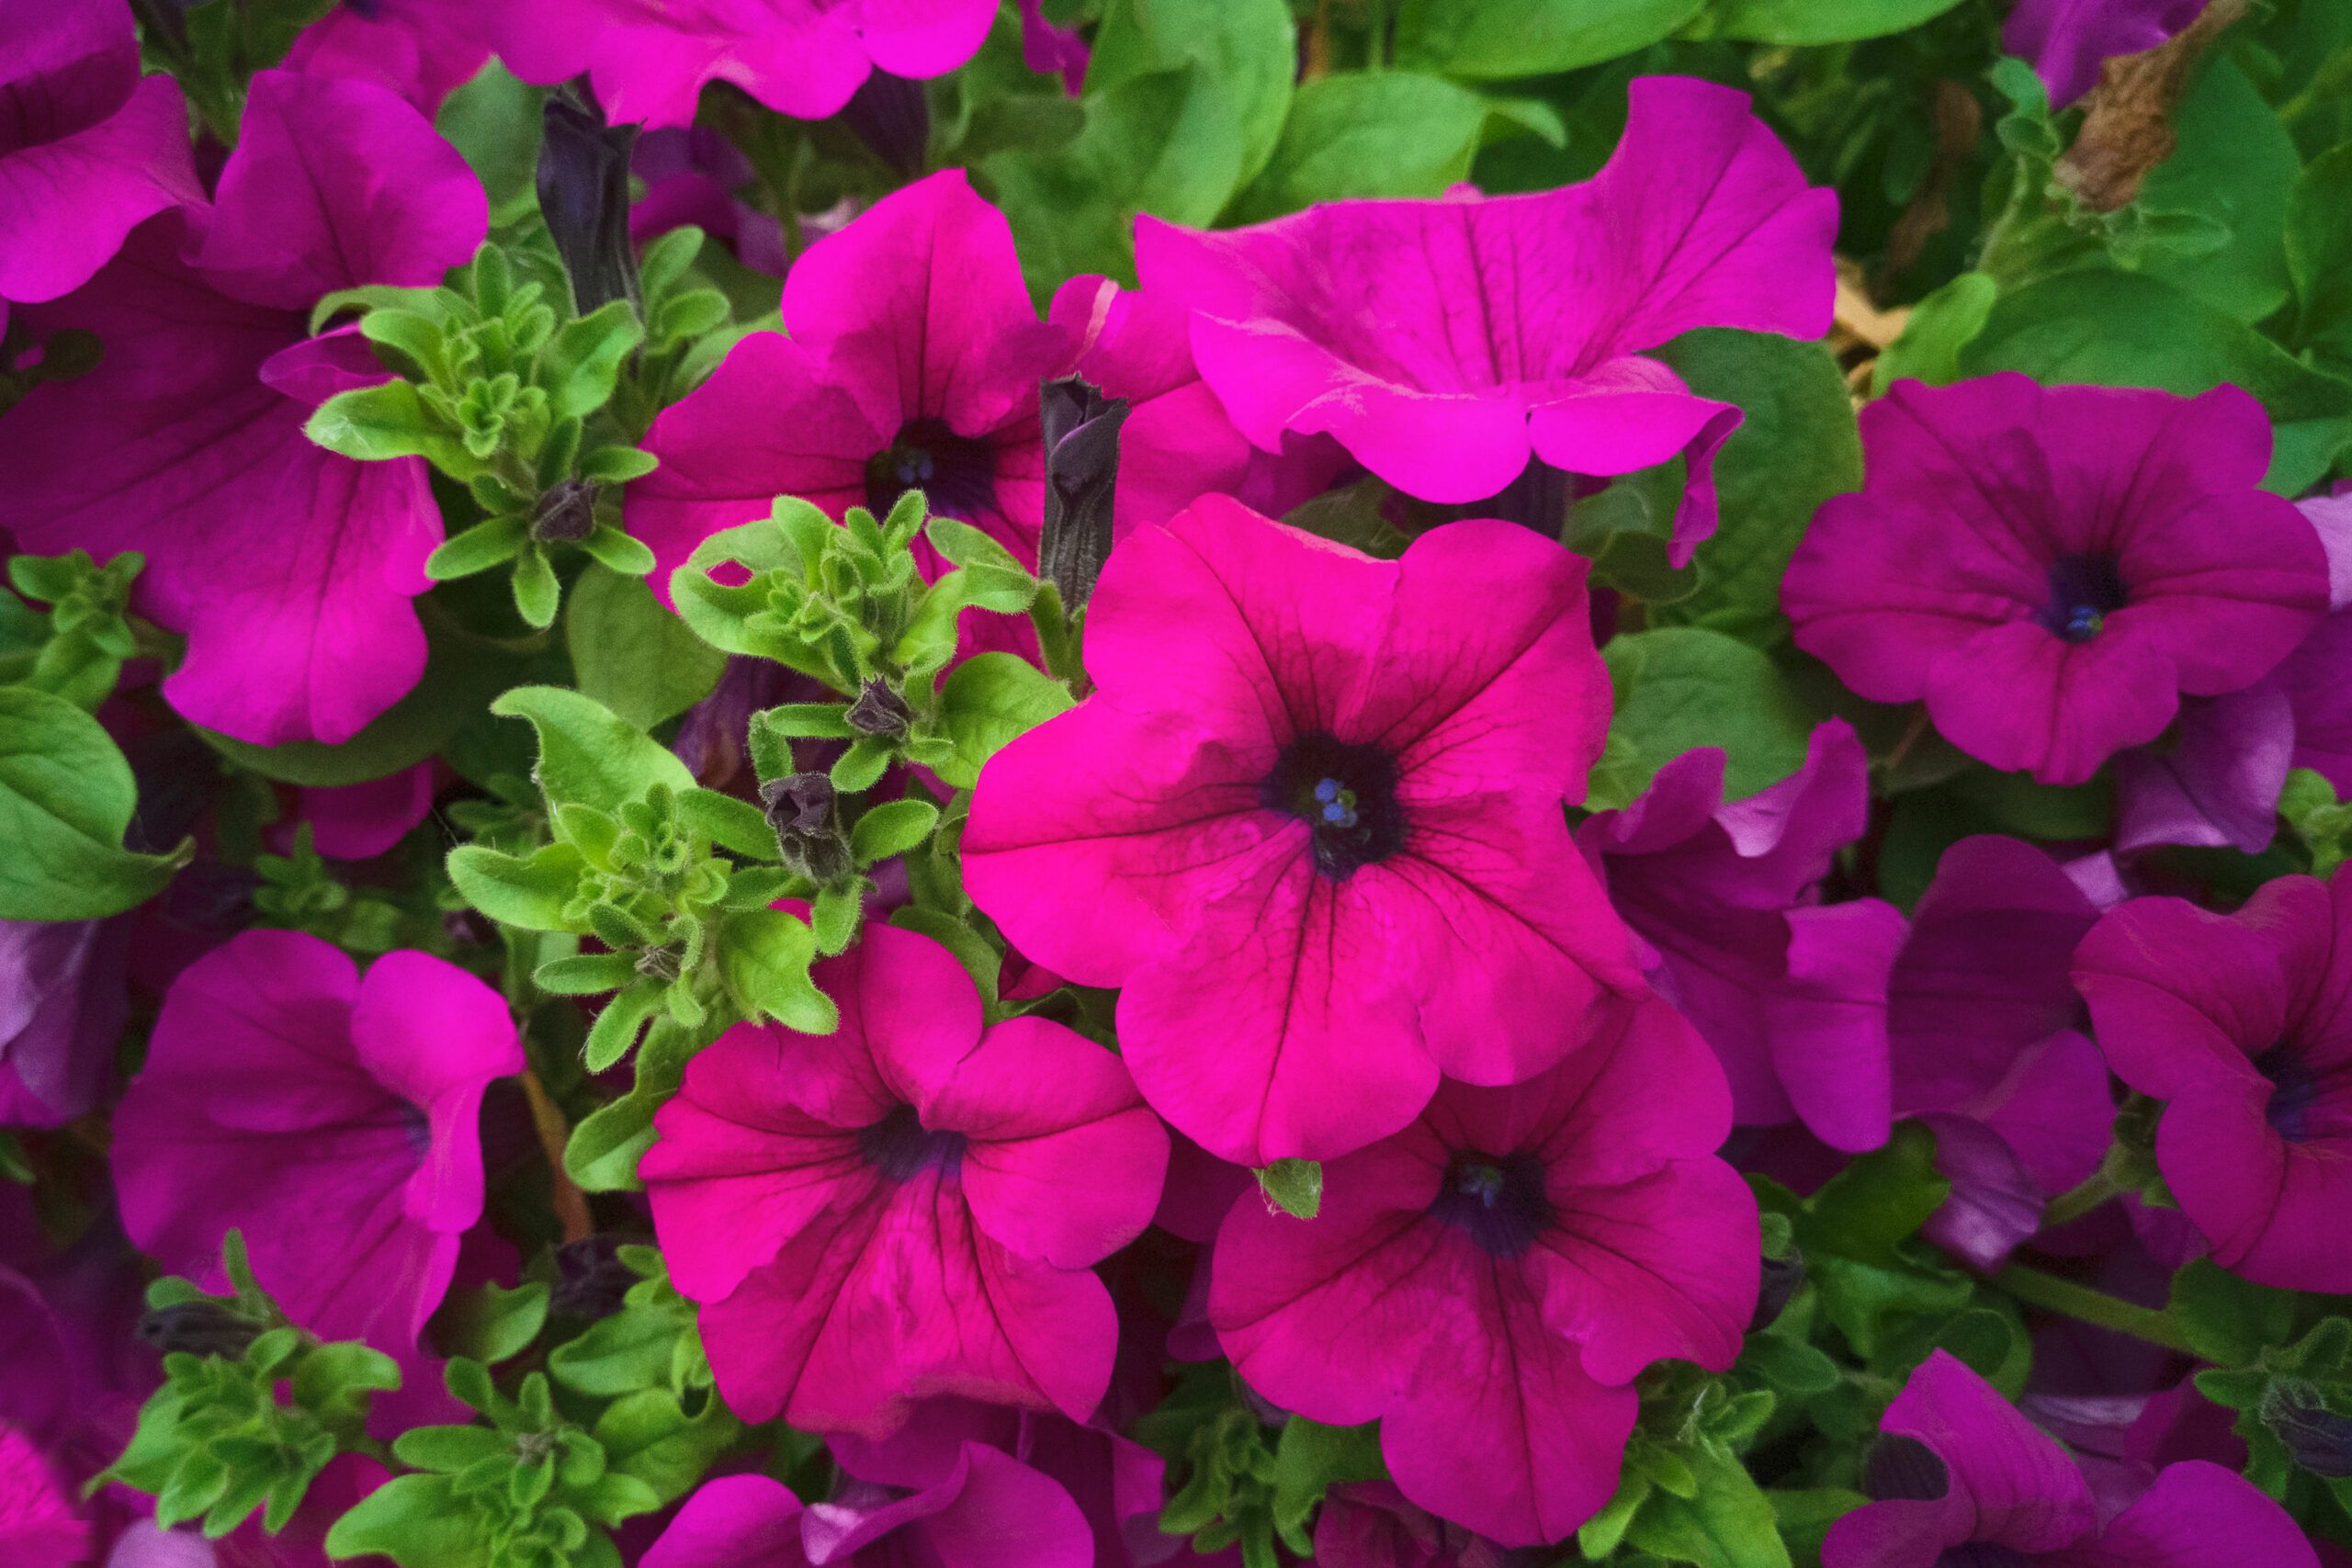 Image of Petunias purple annuals that bloom all summer